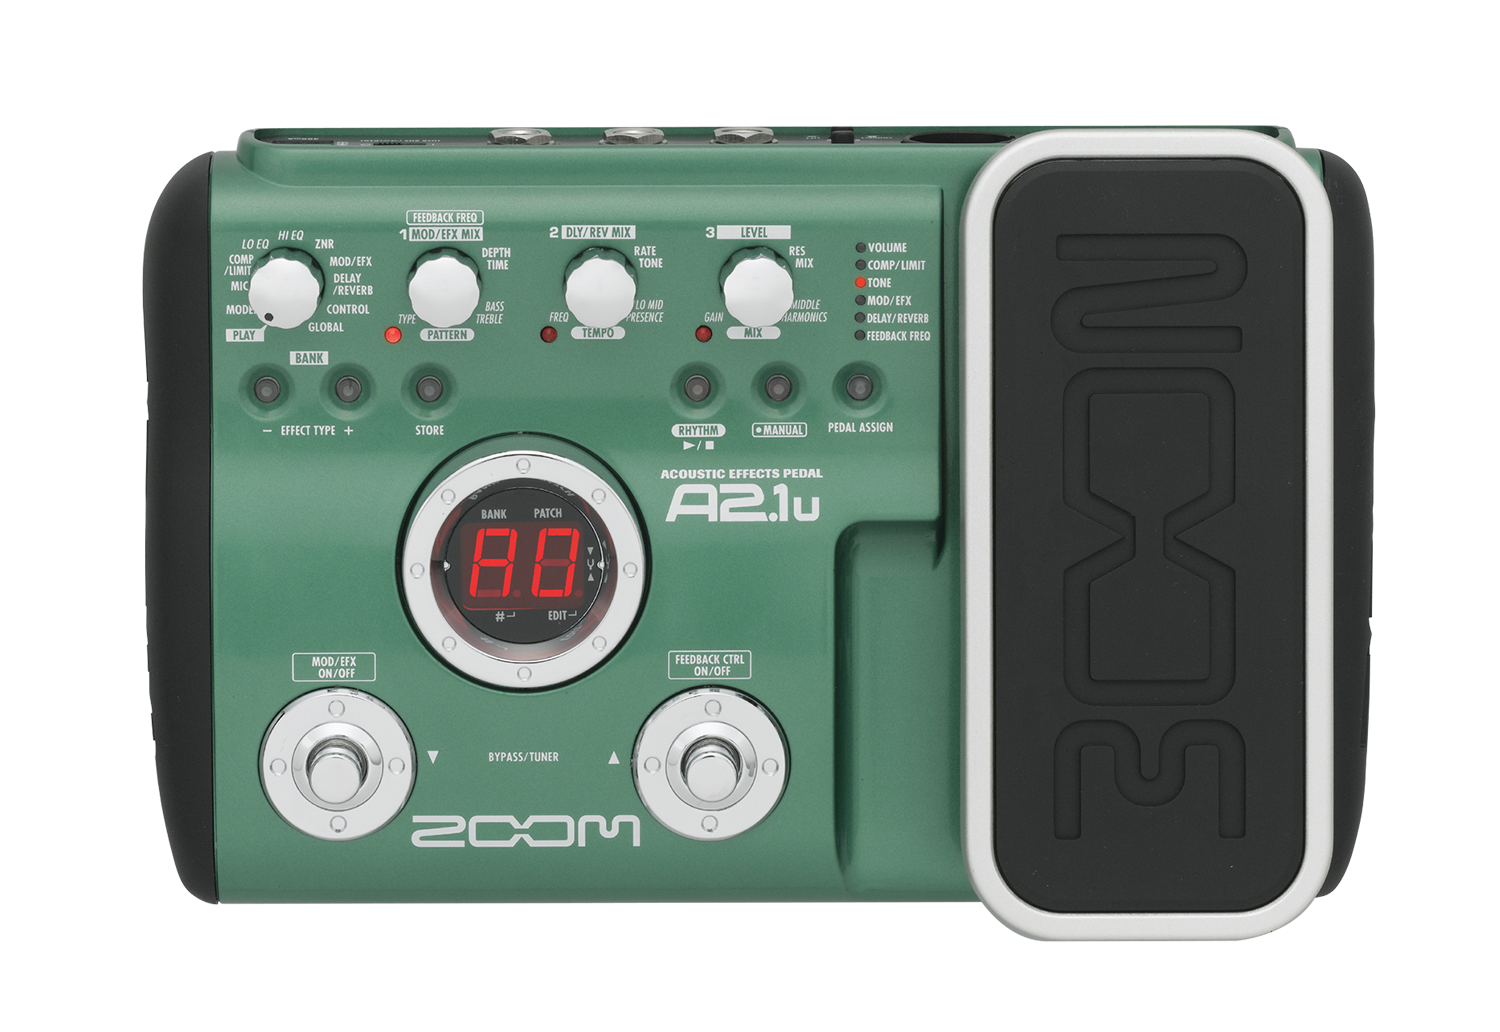 A2.1u Acoustic Effects Pedal | Zoom